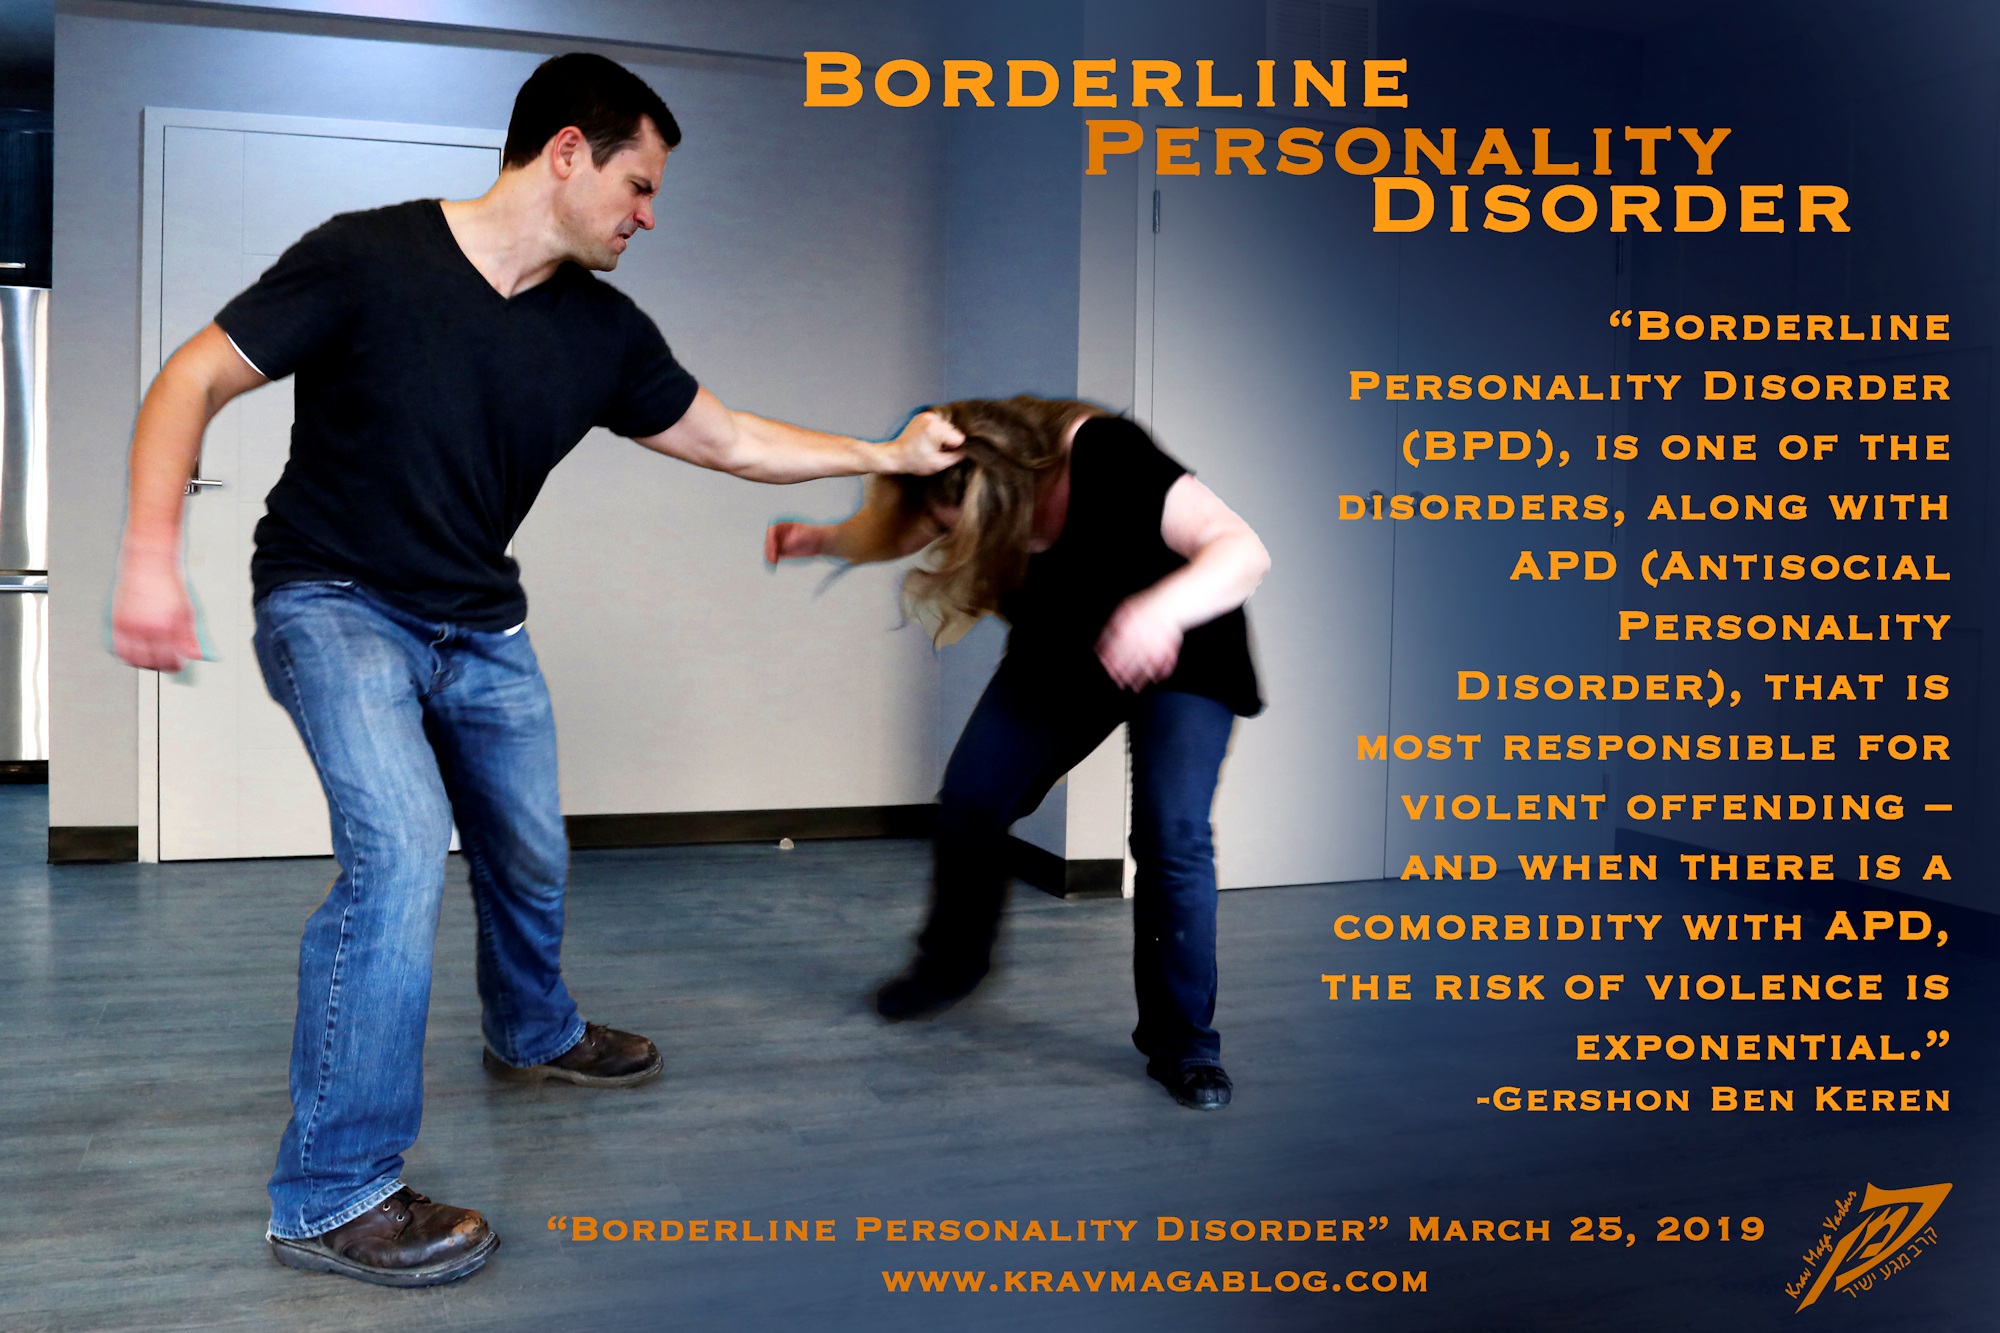 Blog About Borderline Personality Disorder